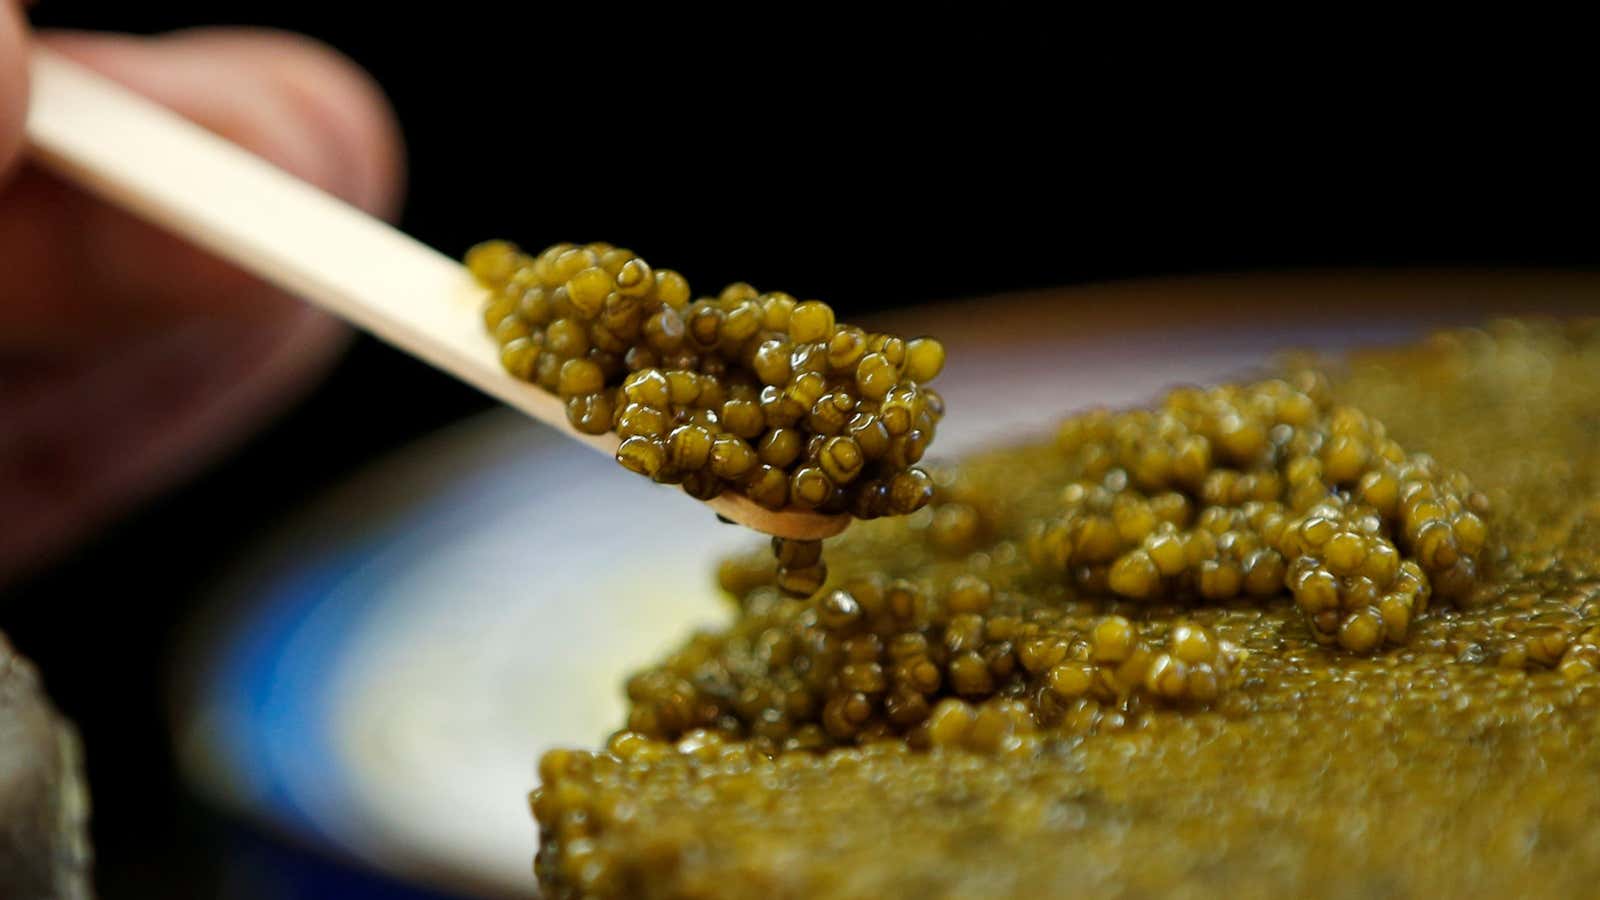 A spoon of caviar at the shop of Petrossian, one of the world’s oldest and largest caviar specialists, in Paris.